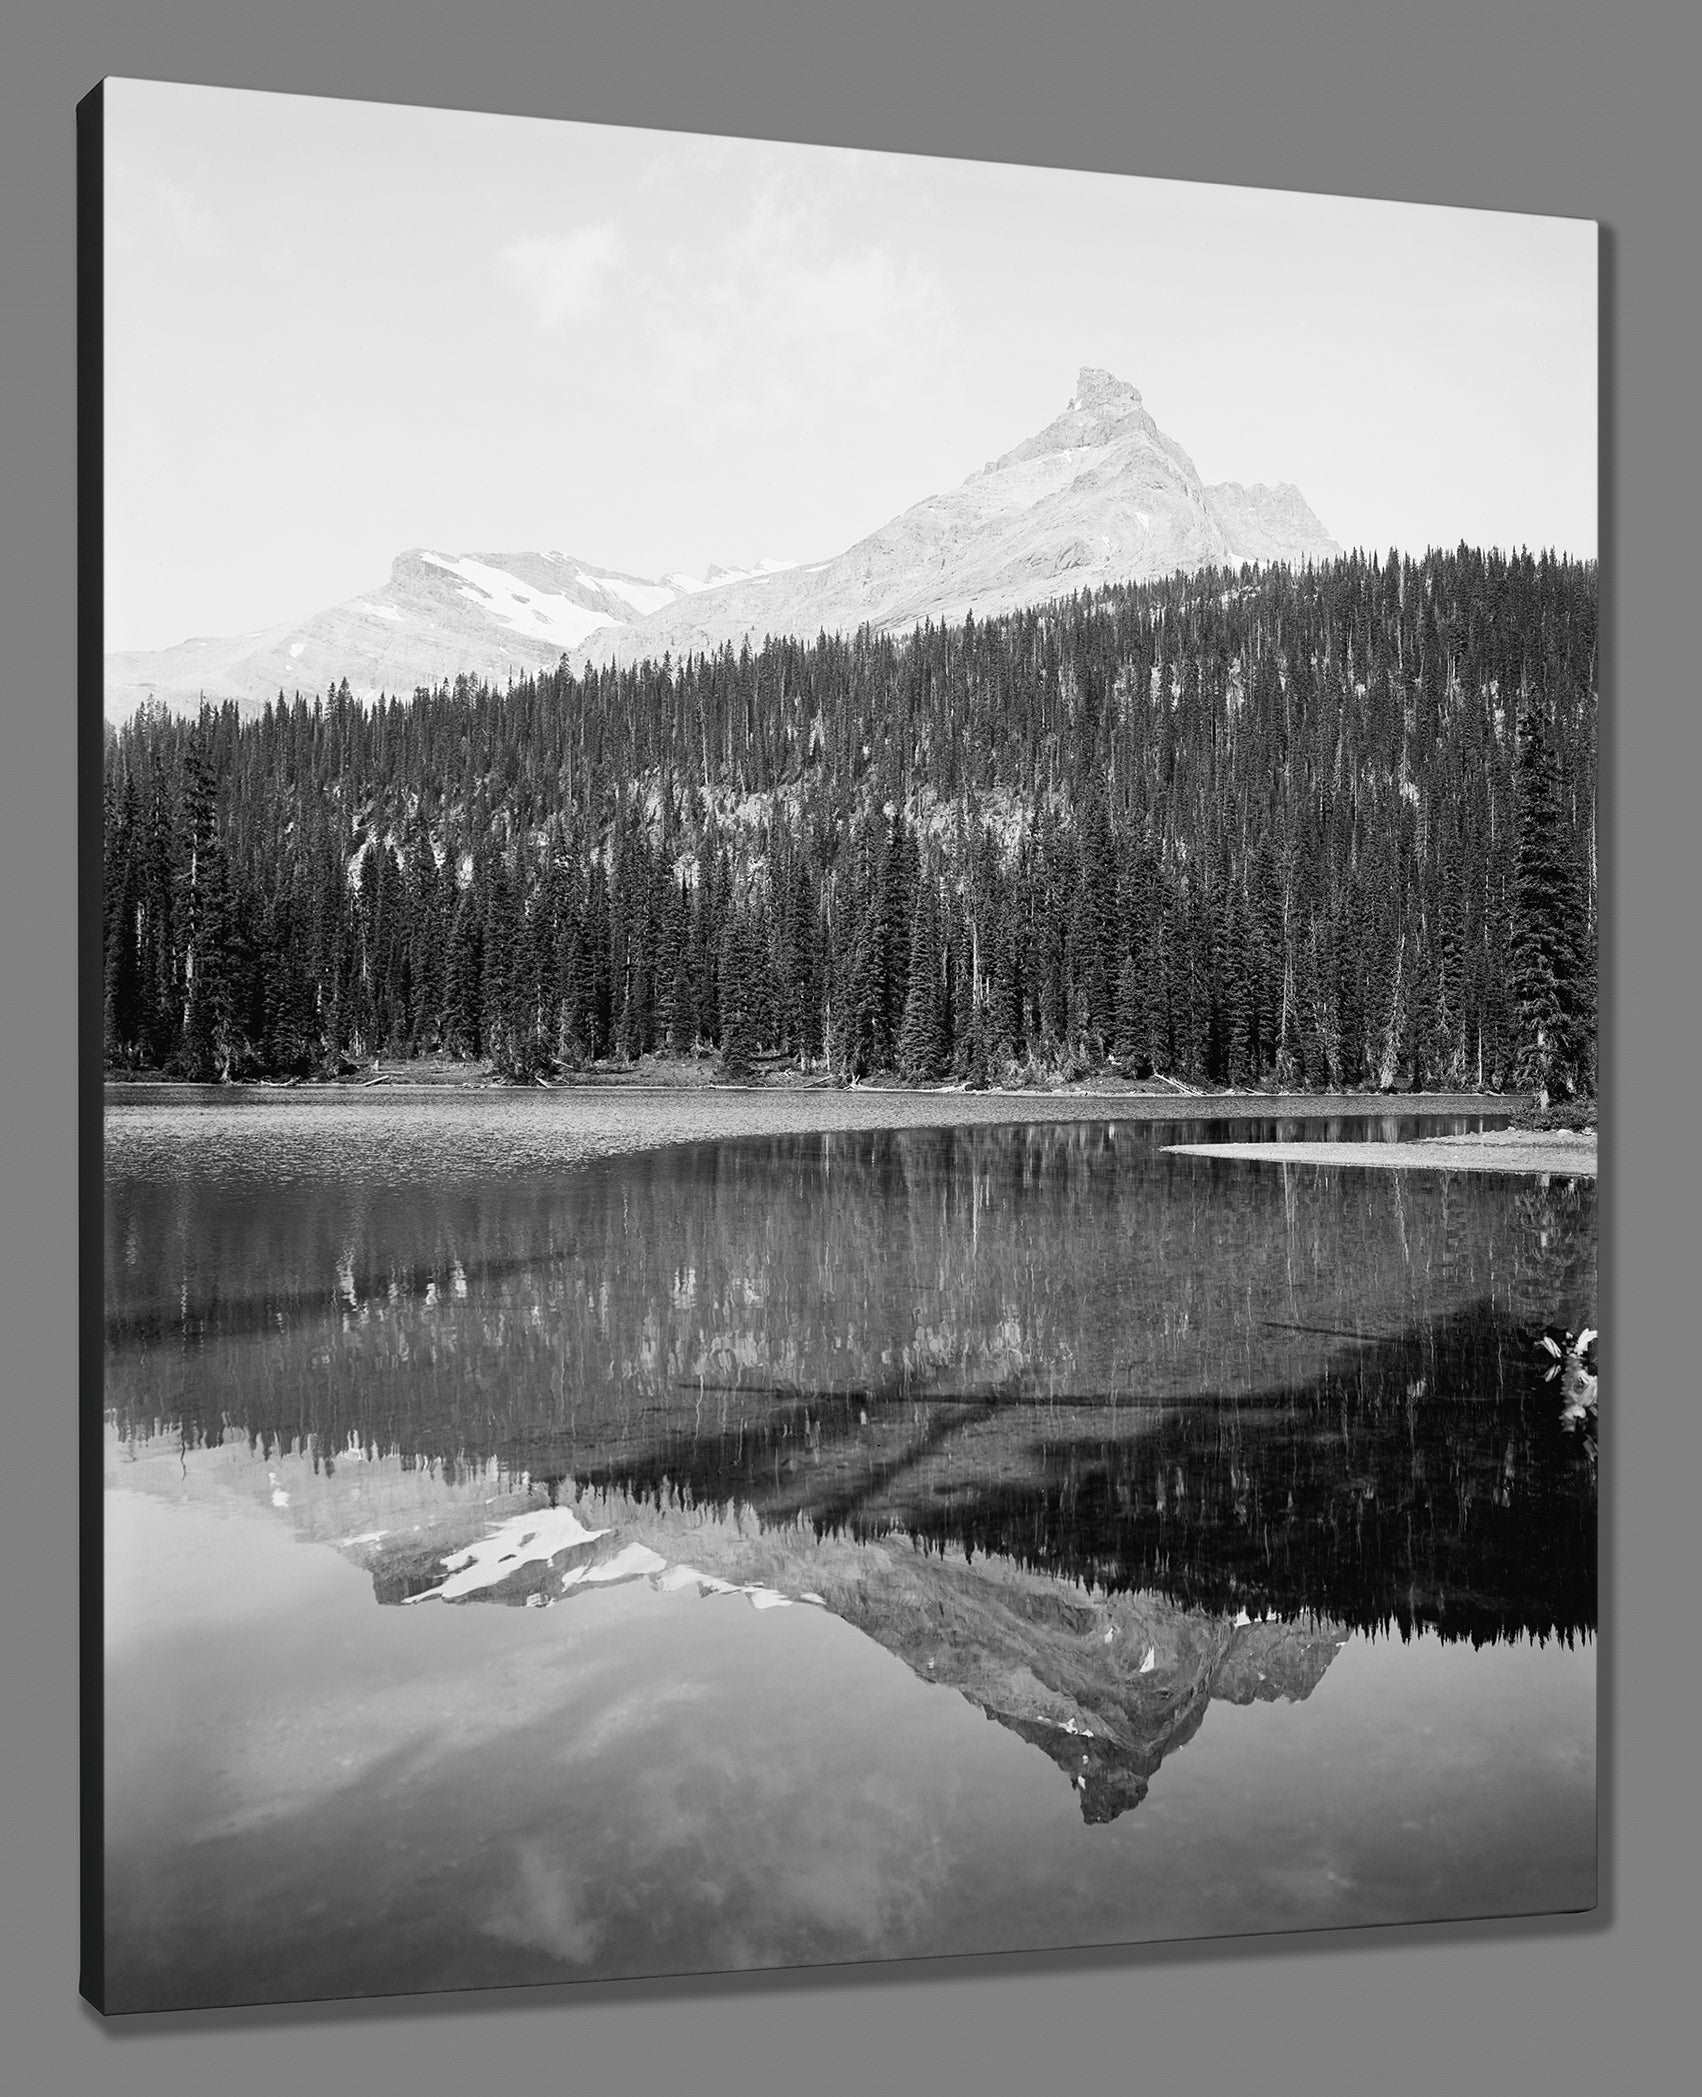 A canvas print reproduction of a vintage landscape photo of Summit Lake